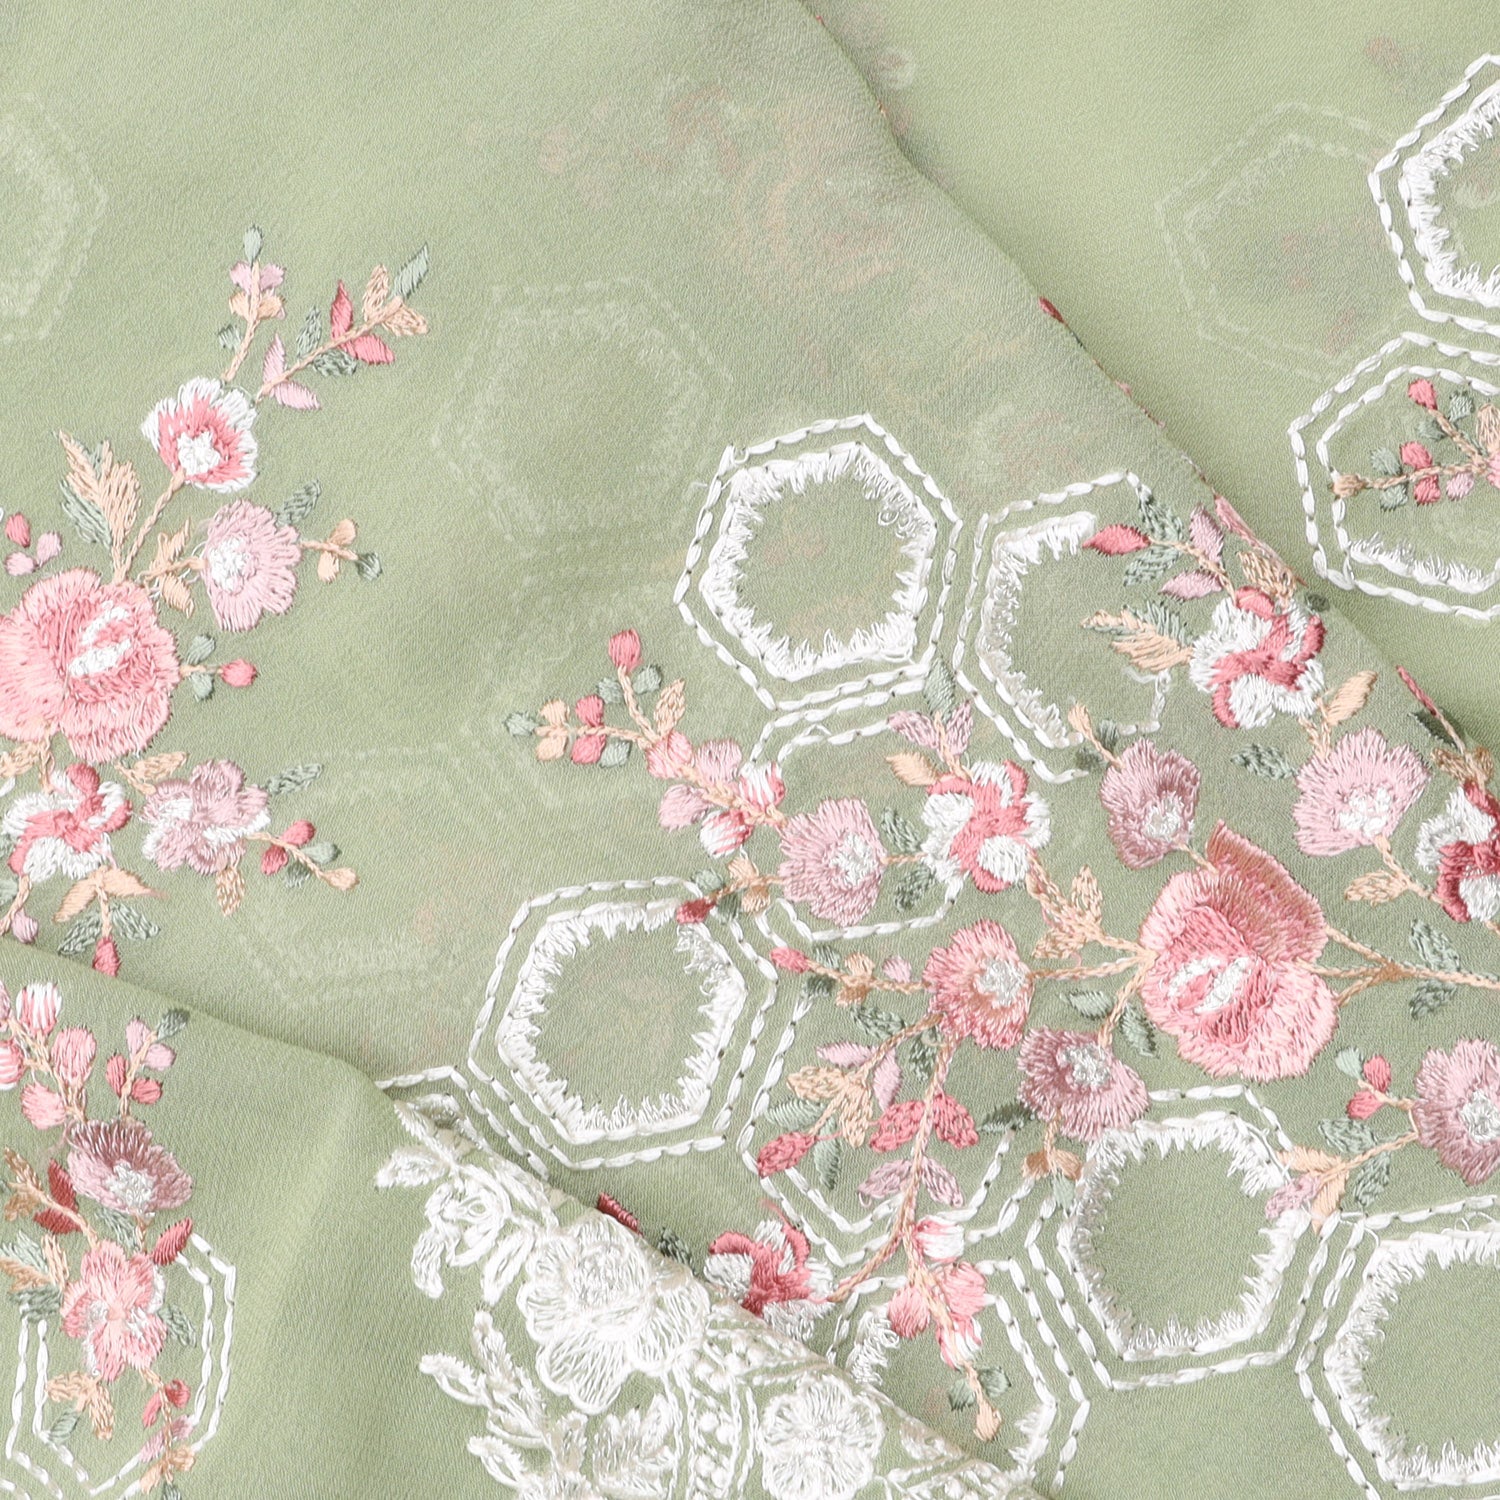 Mint Green Georgette Saree With Floral Embroidery Pattern - Singhania's